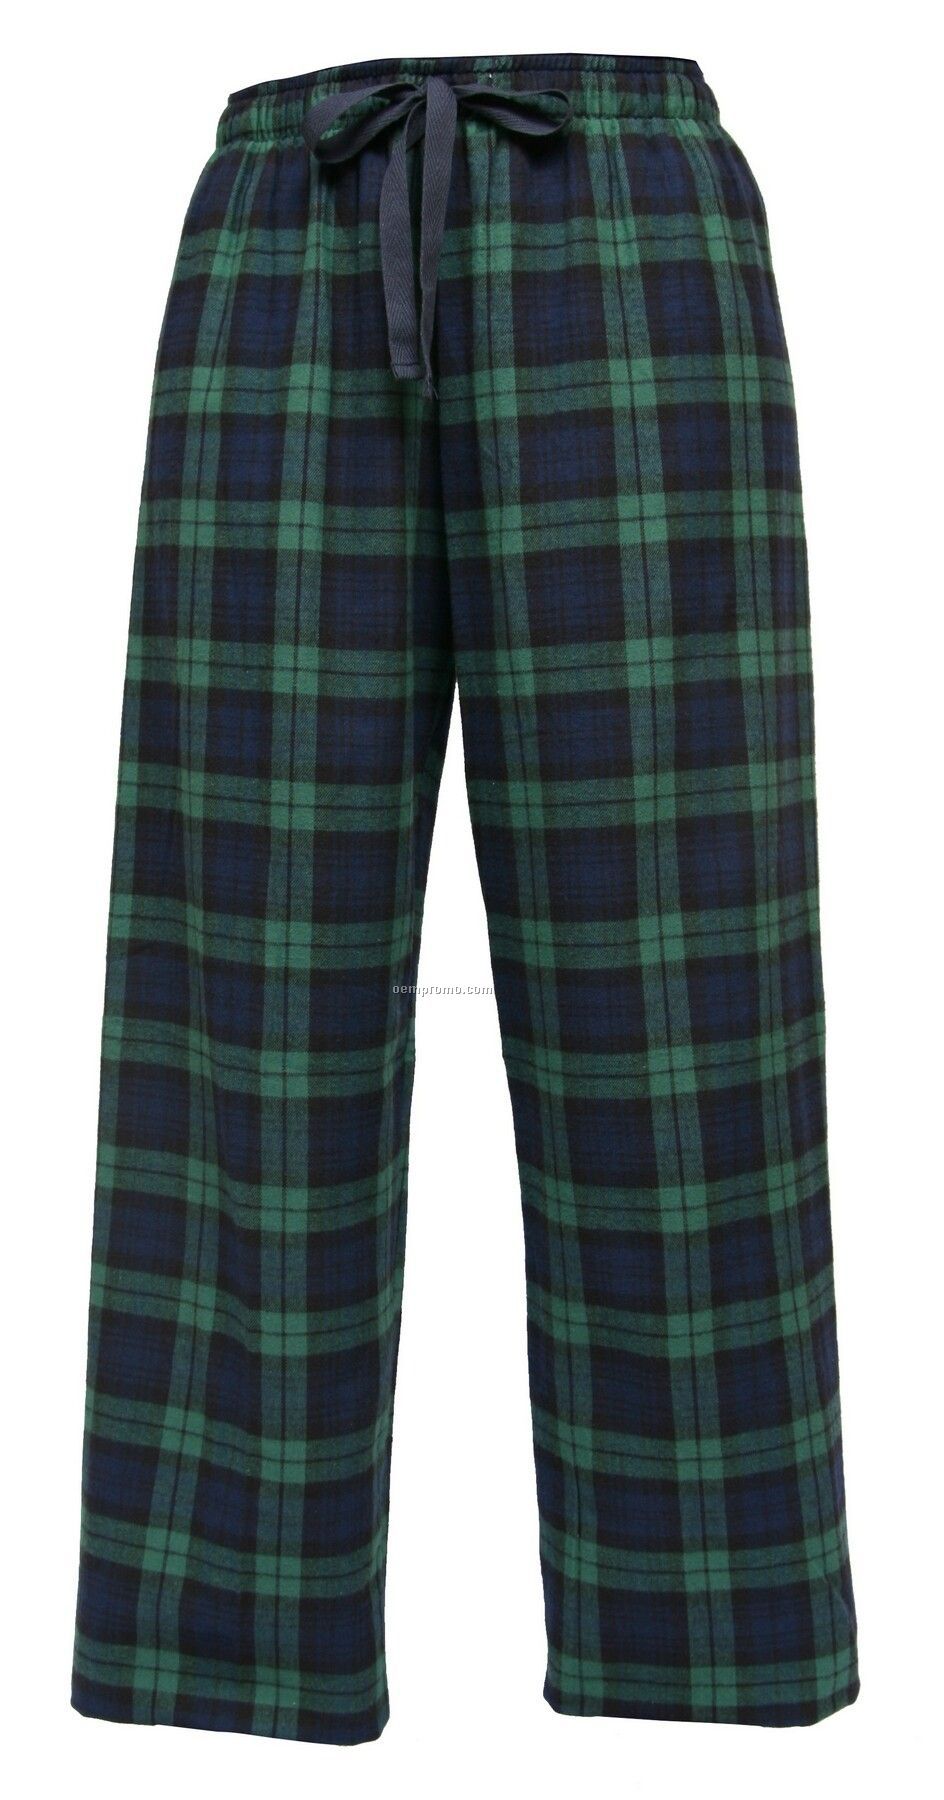 Youth Blackwatch Plaid Fashion Flannel Pants With Tie Cord